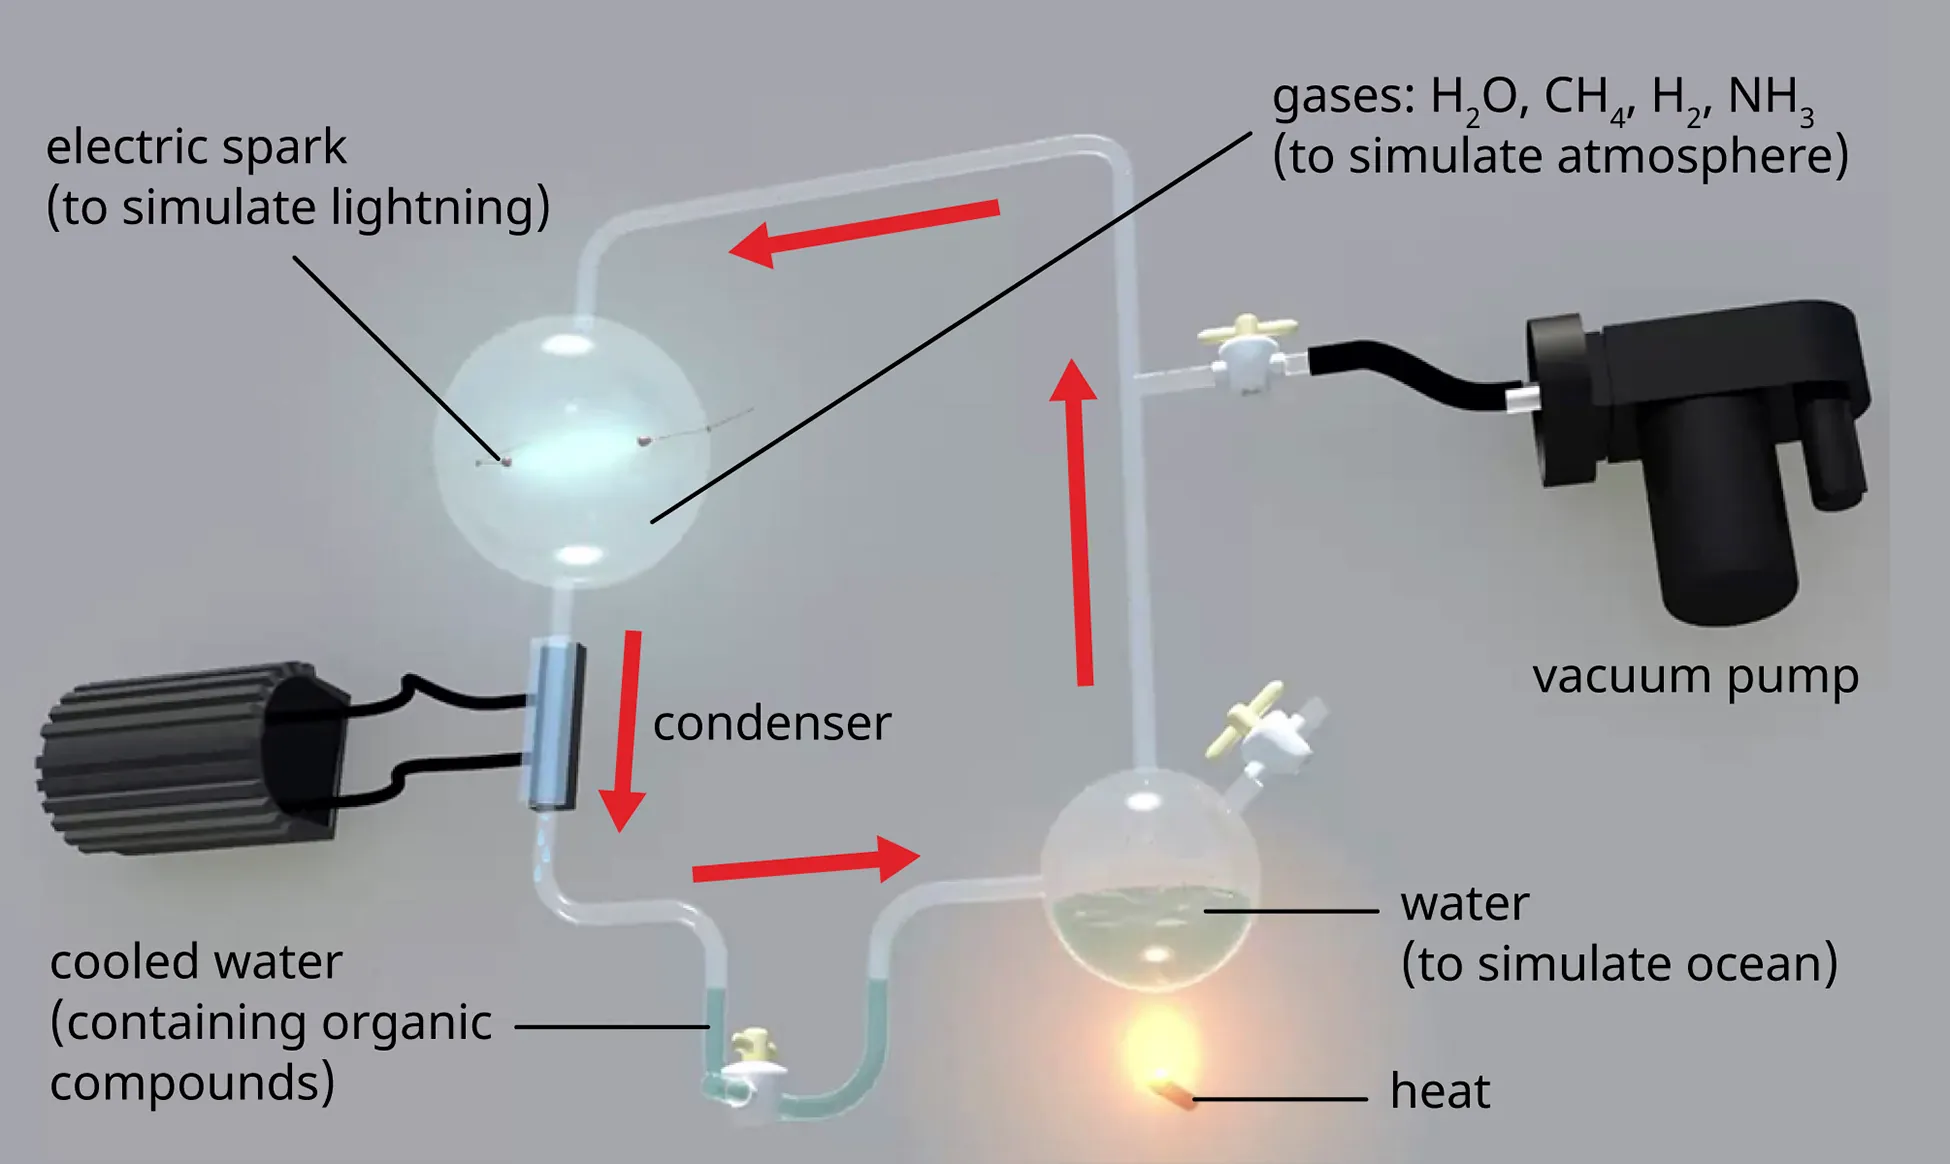 Diagram of the Miller-Urey experiment. A flask of water (to simulate the ocean) is heated. This is connected via glass tubing in a closed loop to: a vacuum pump, a flask containing gases (water, methane, hydrogen, ammonia), and an electric spark (to simulate lightning), and final to a condenser that cools the water. The cooled water contains organic compounds.